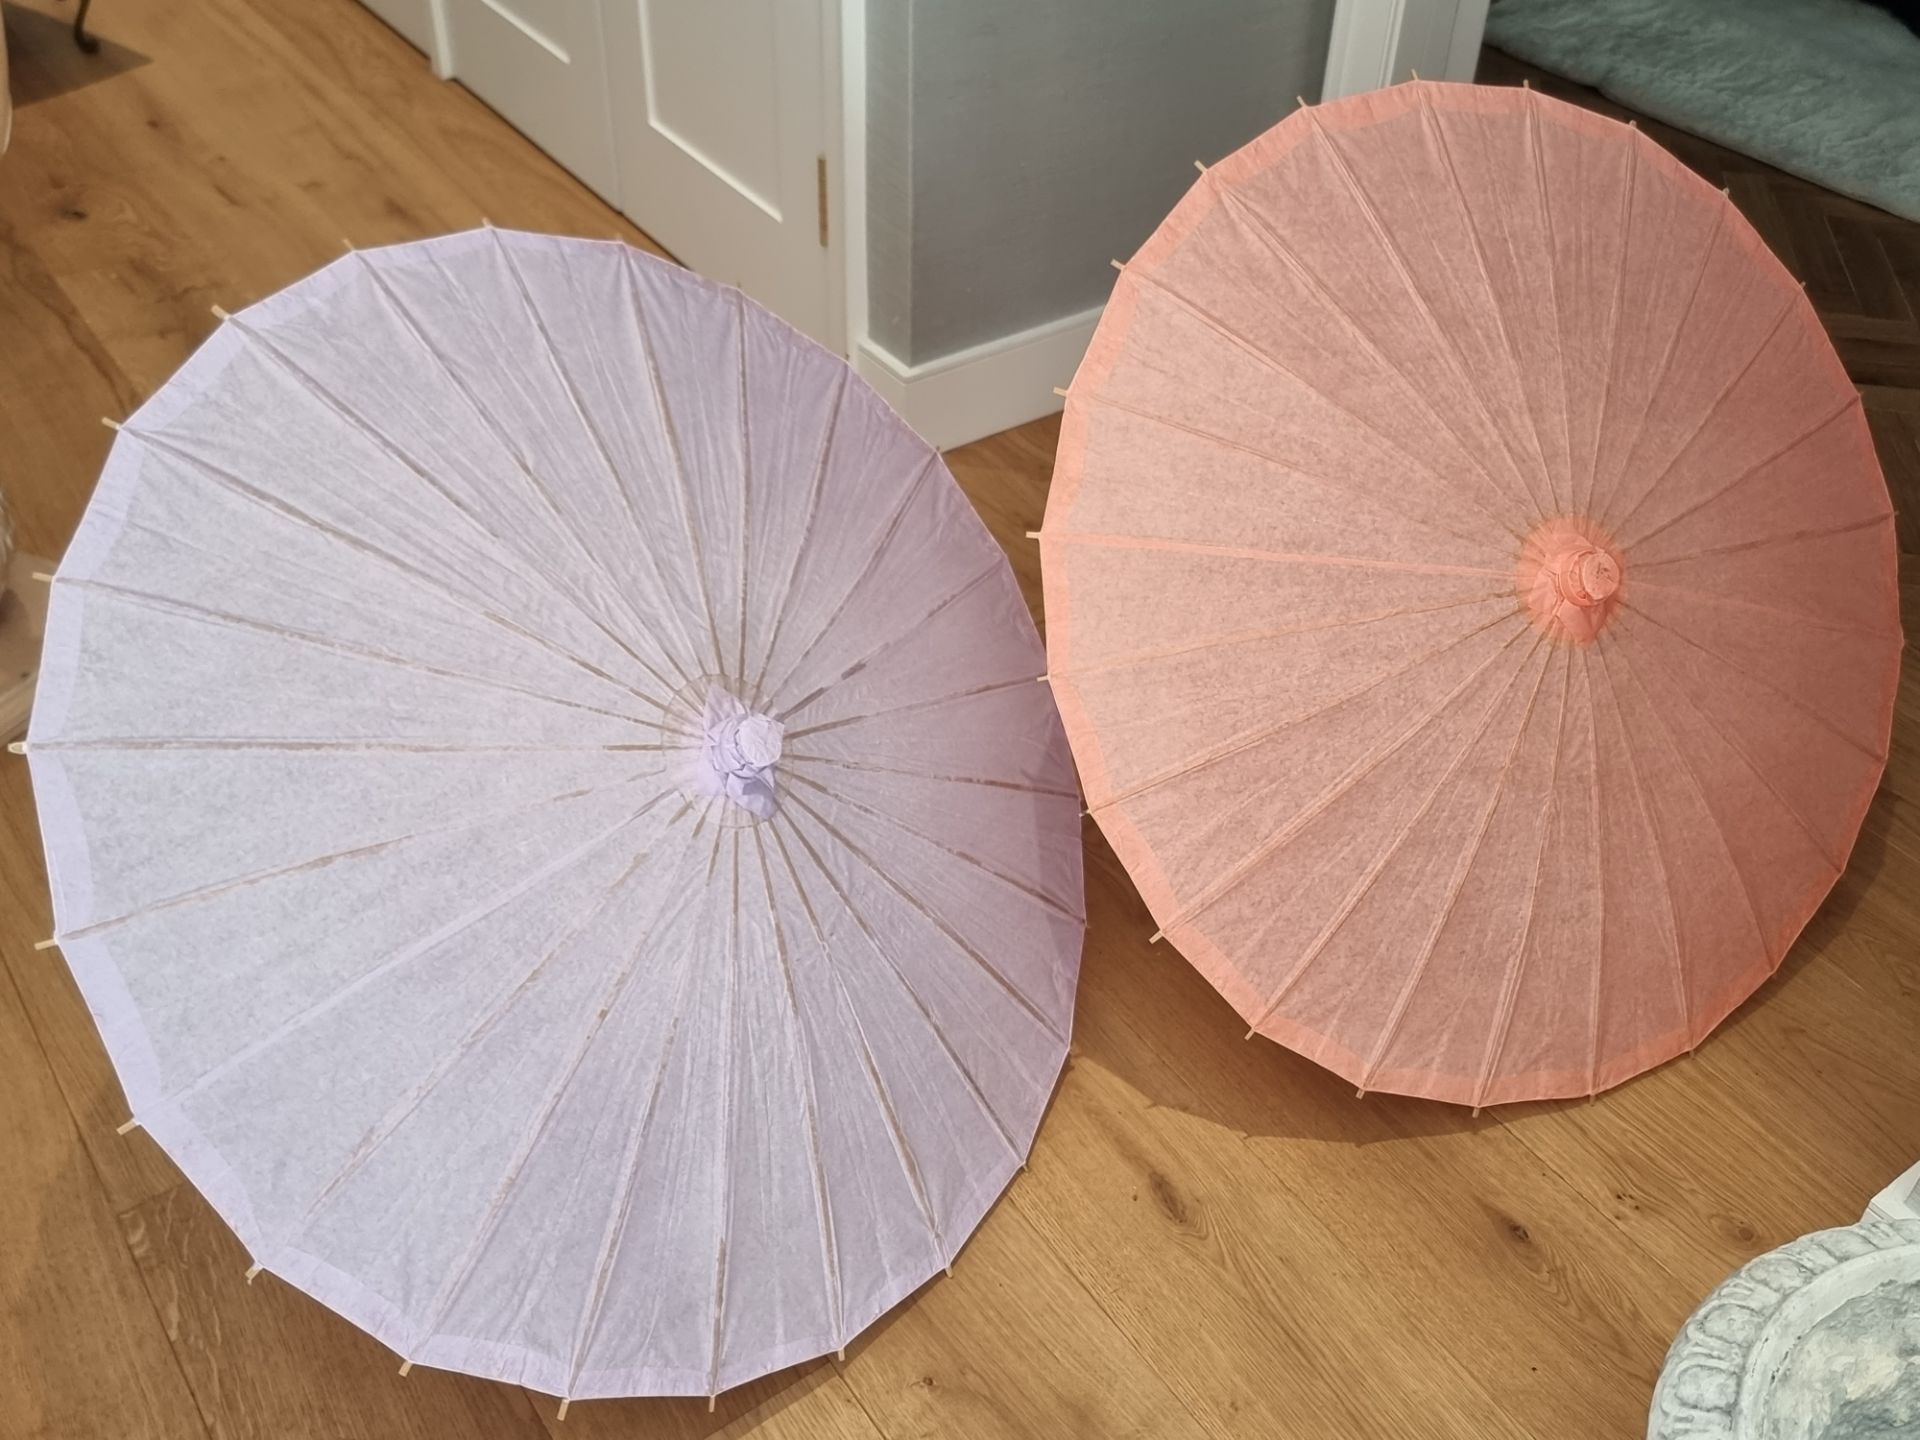 2 x Chinese Paper And Bamboo Parasols With Elegant Handle Painted Rice Paper Parasols Manual - Image 2 of 5